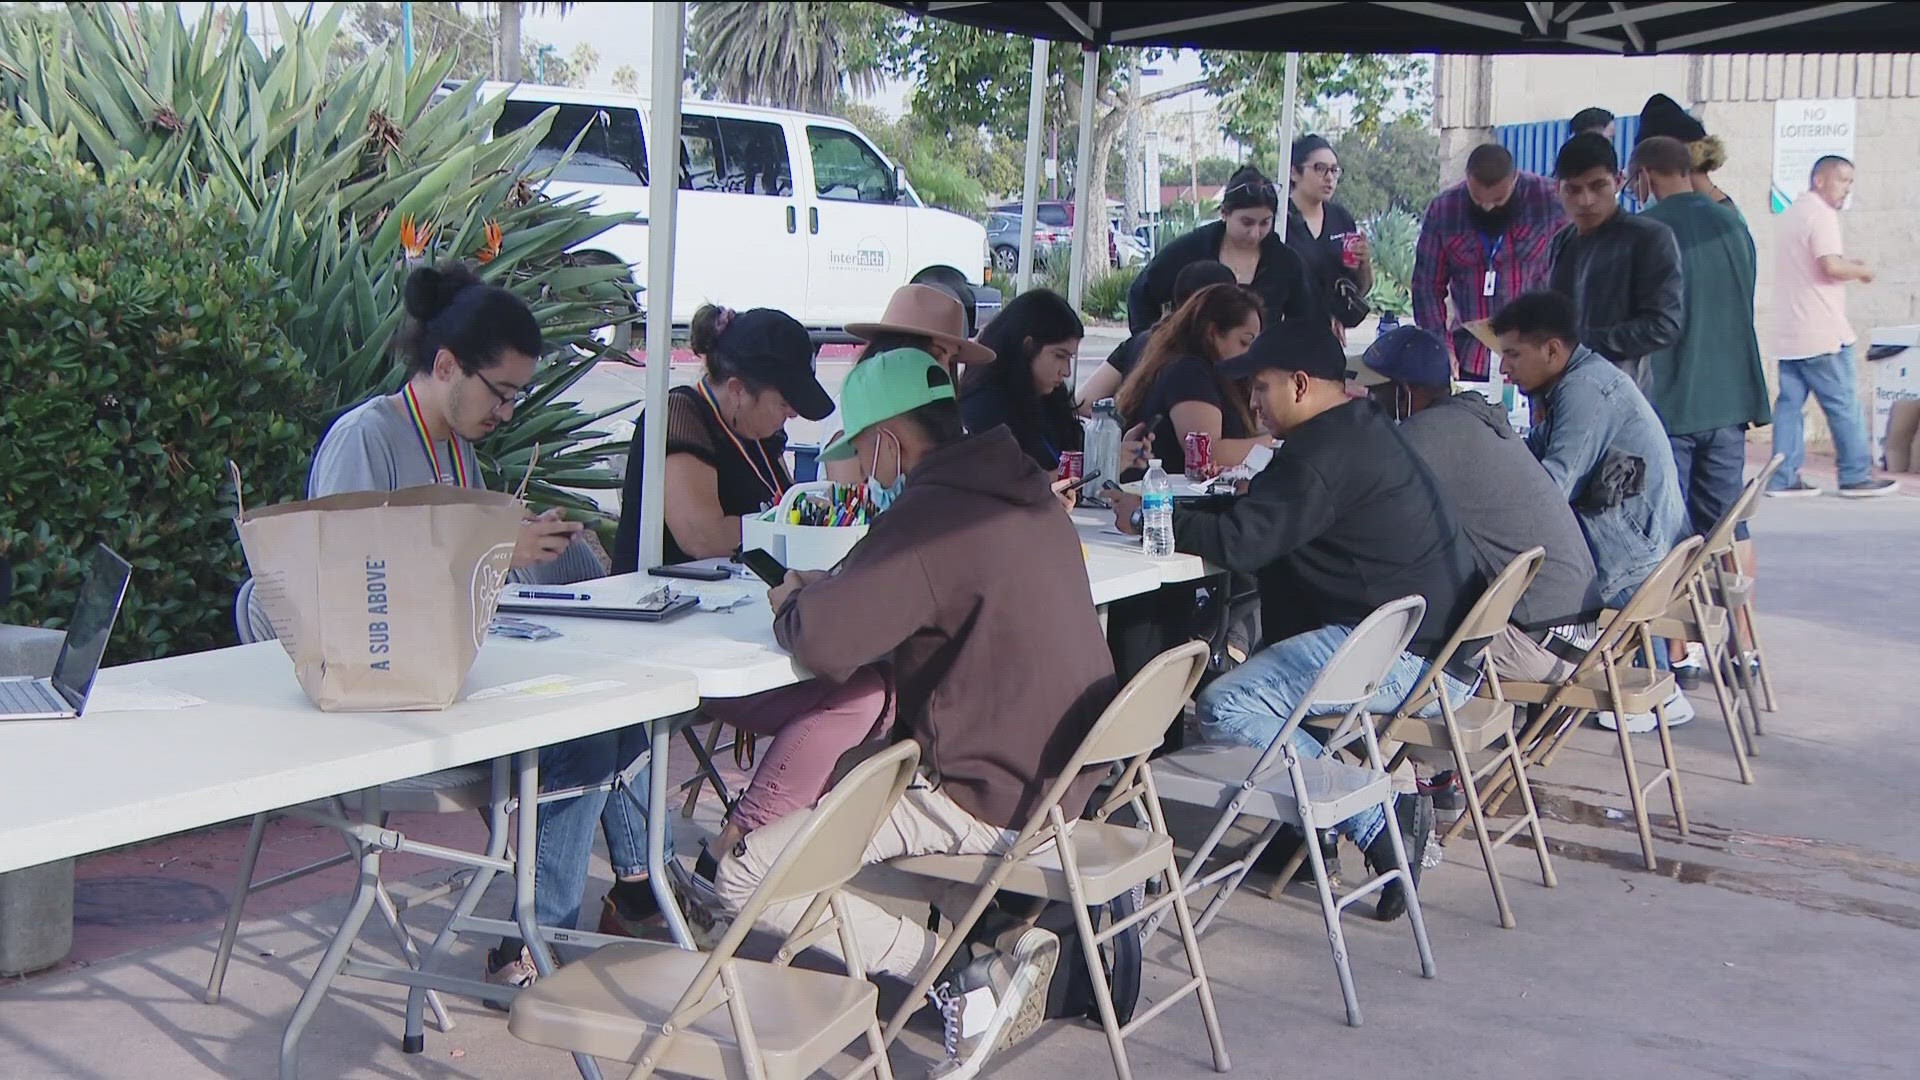 Some County Supervisors are calling for federal assistance after an influx of migrants at the border.